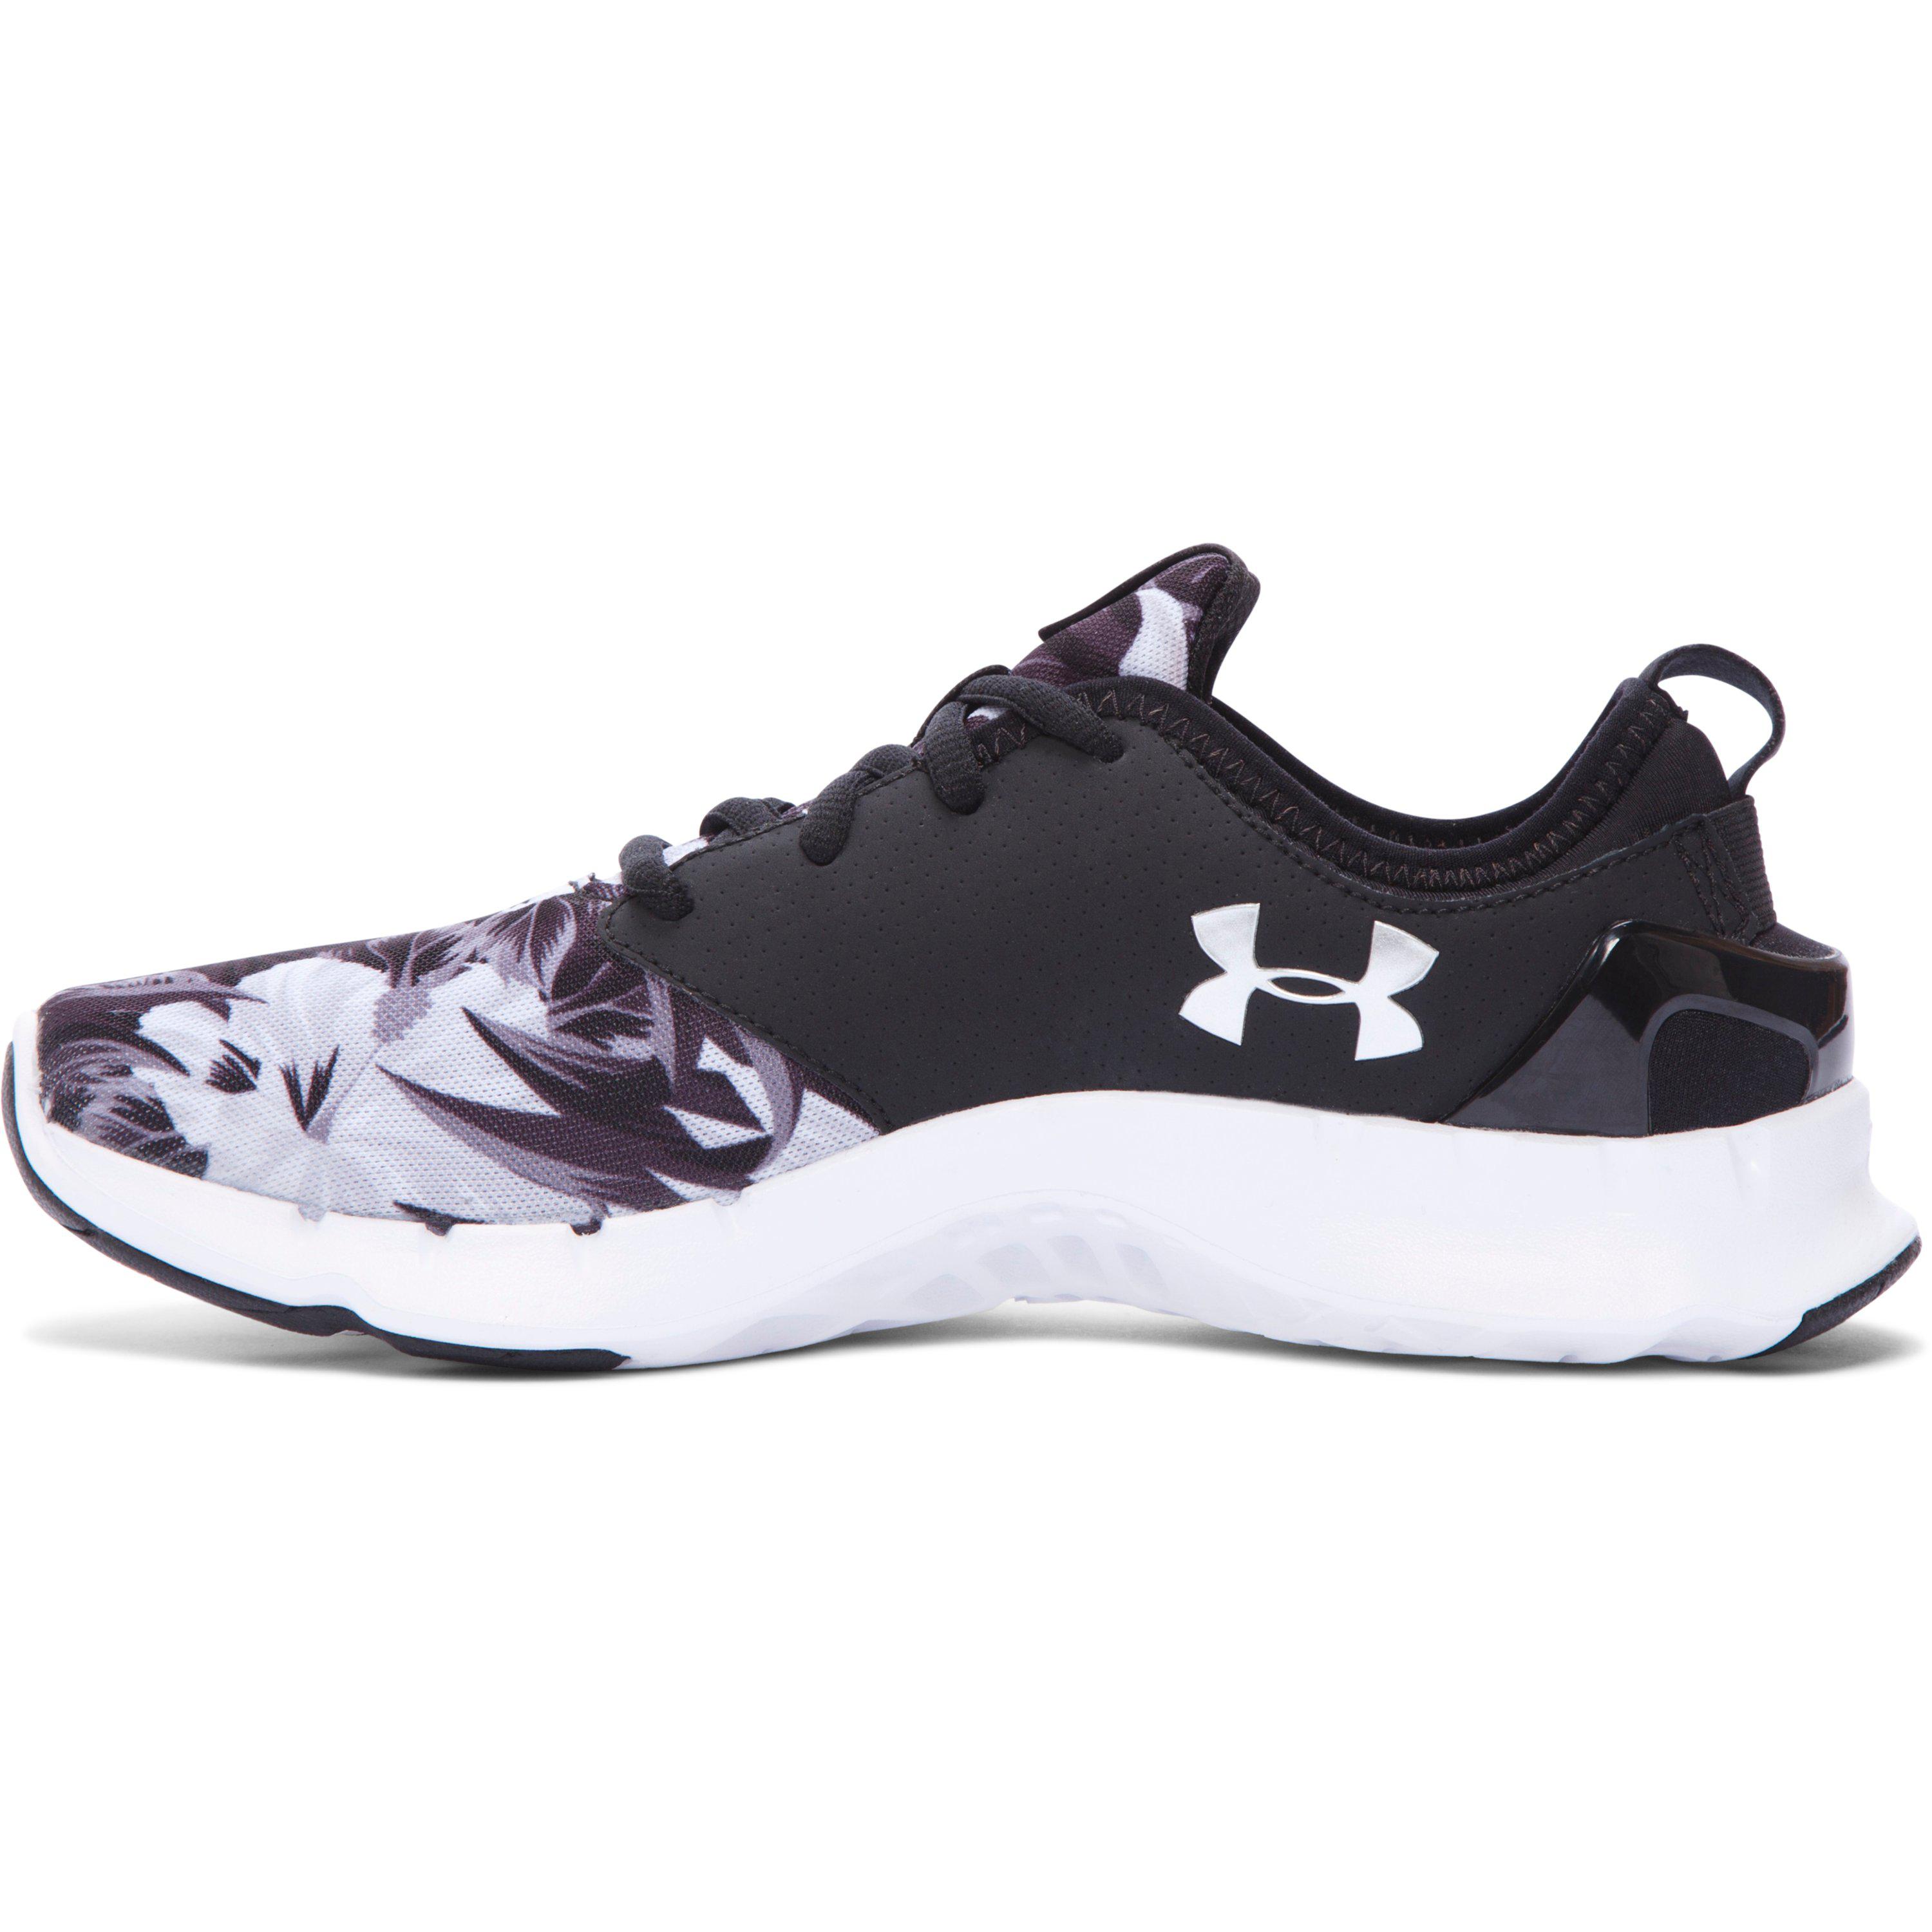 floral under armour shoes off 64% - www 